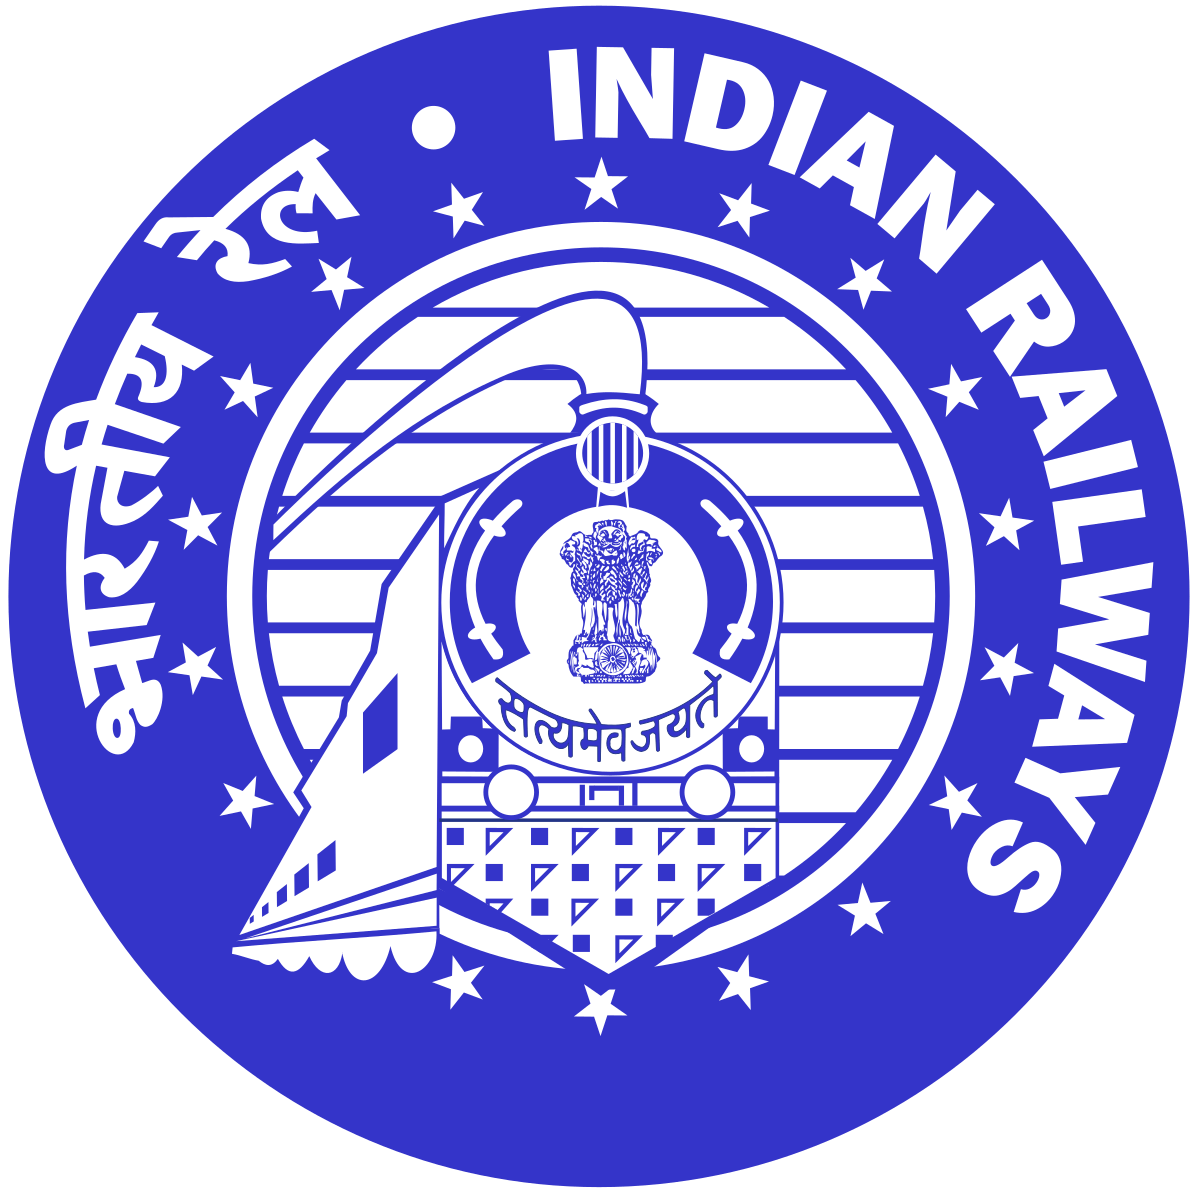 Demand of apprentices for appointment in railways without undergoing due recruitment process is not acceptable, says Railway